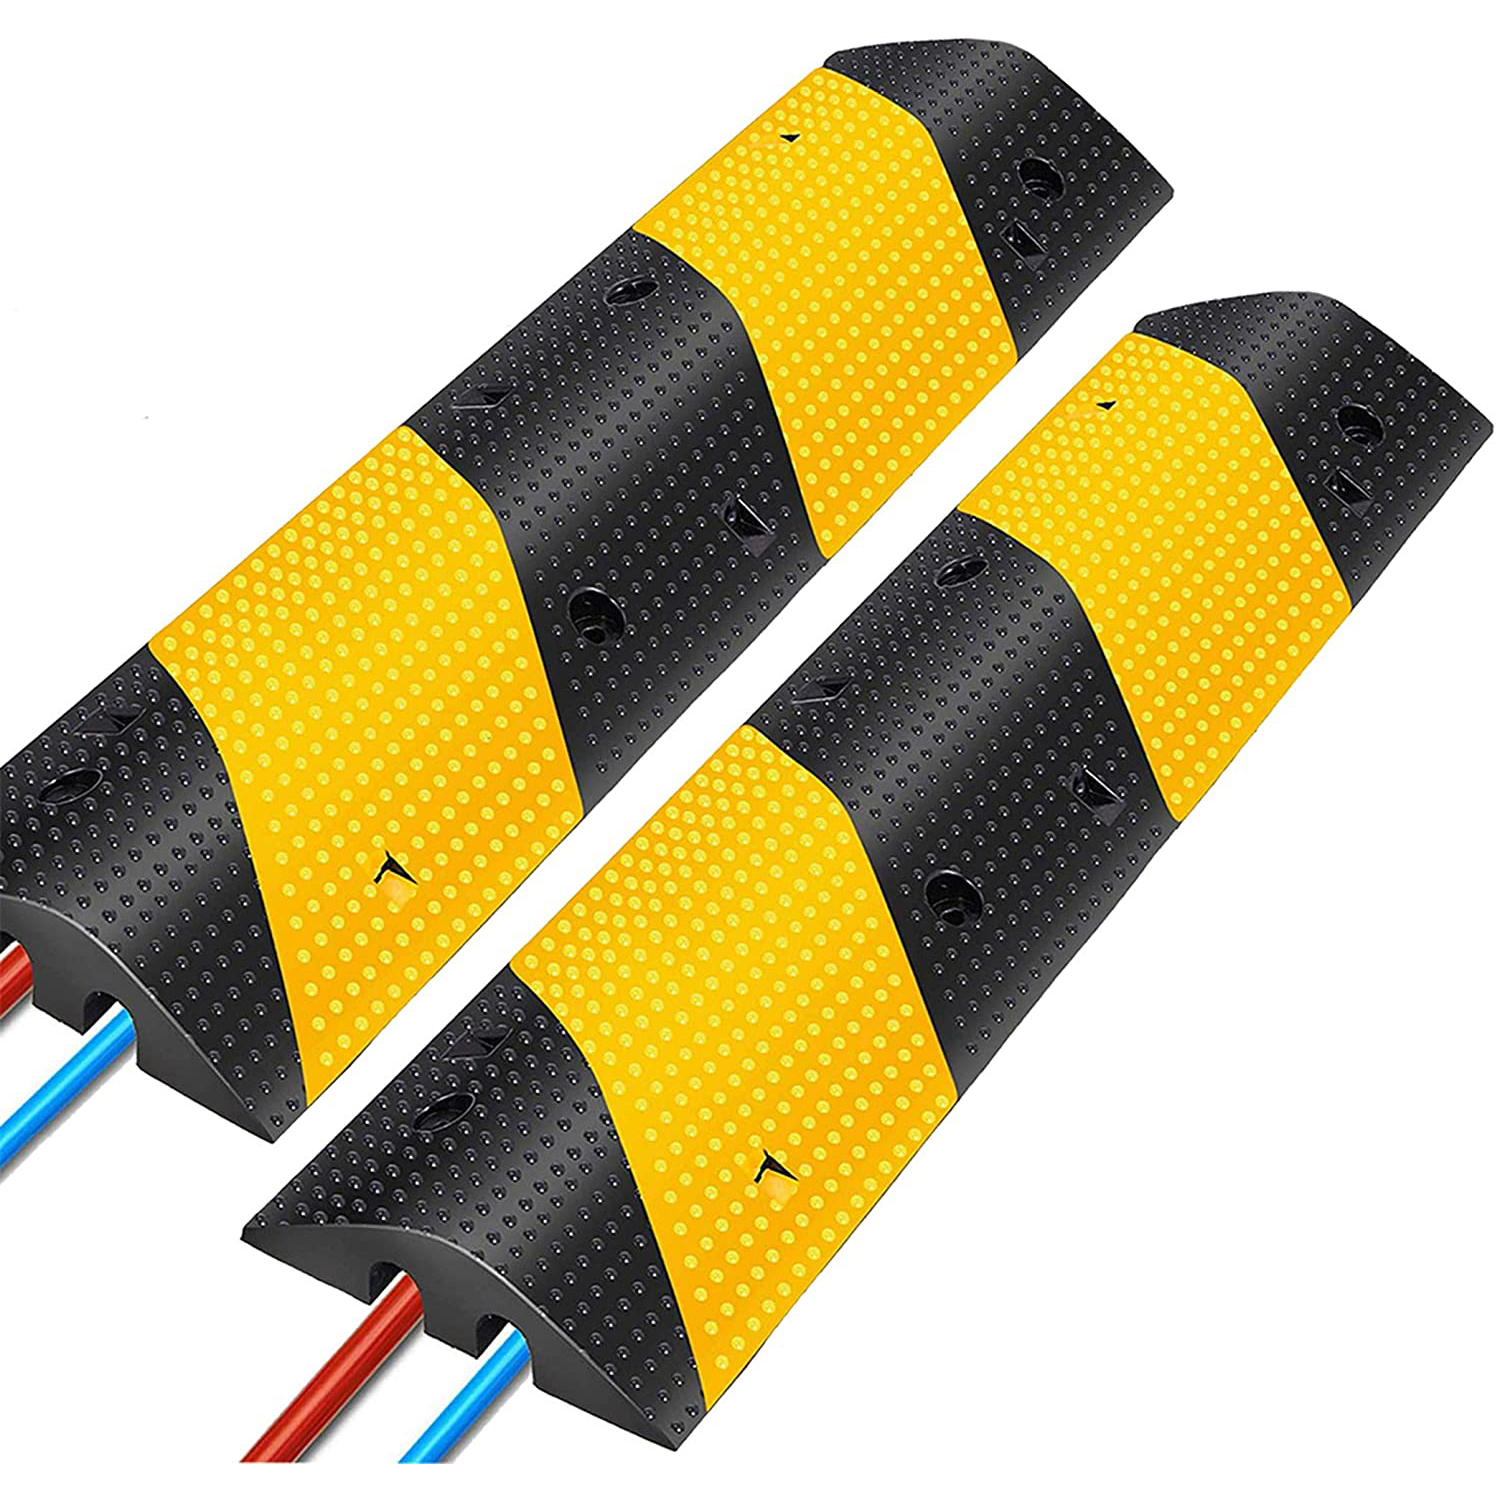 China Speed Bump Supplier, Manufacturer and Factory – Find Reliable  Products at Competitive Prices